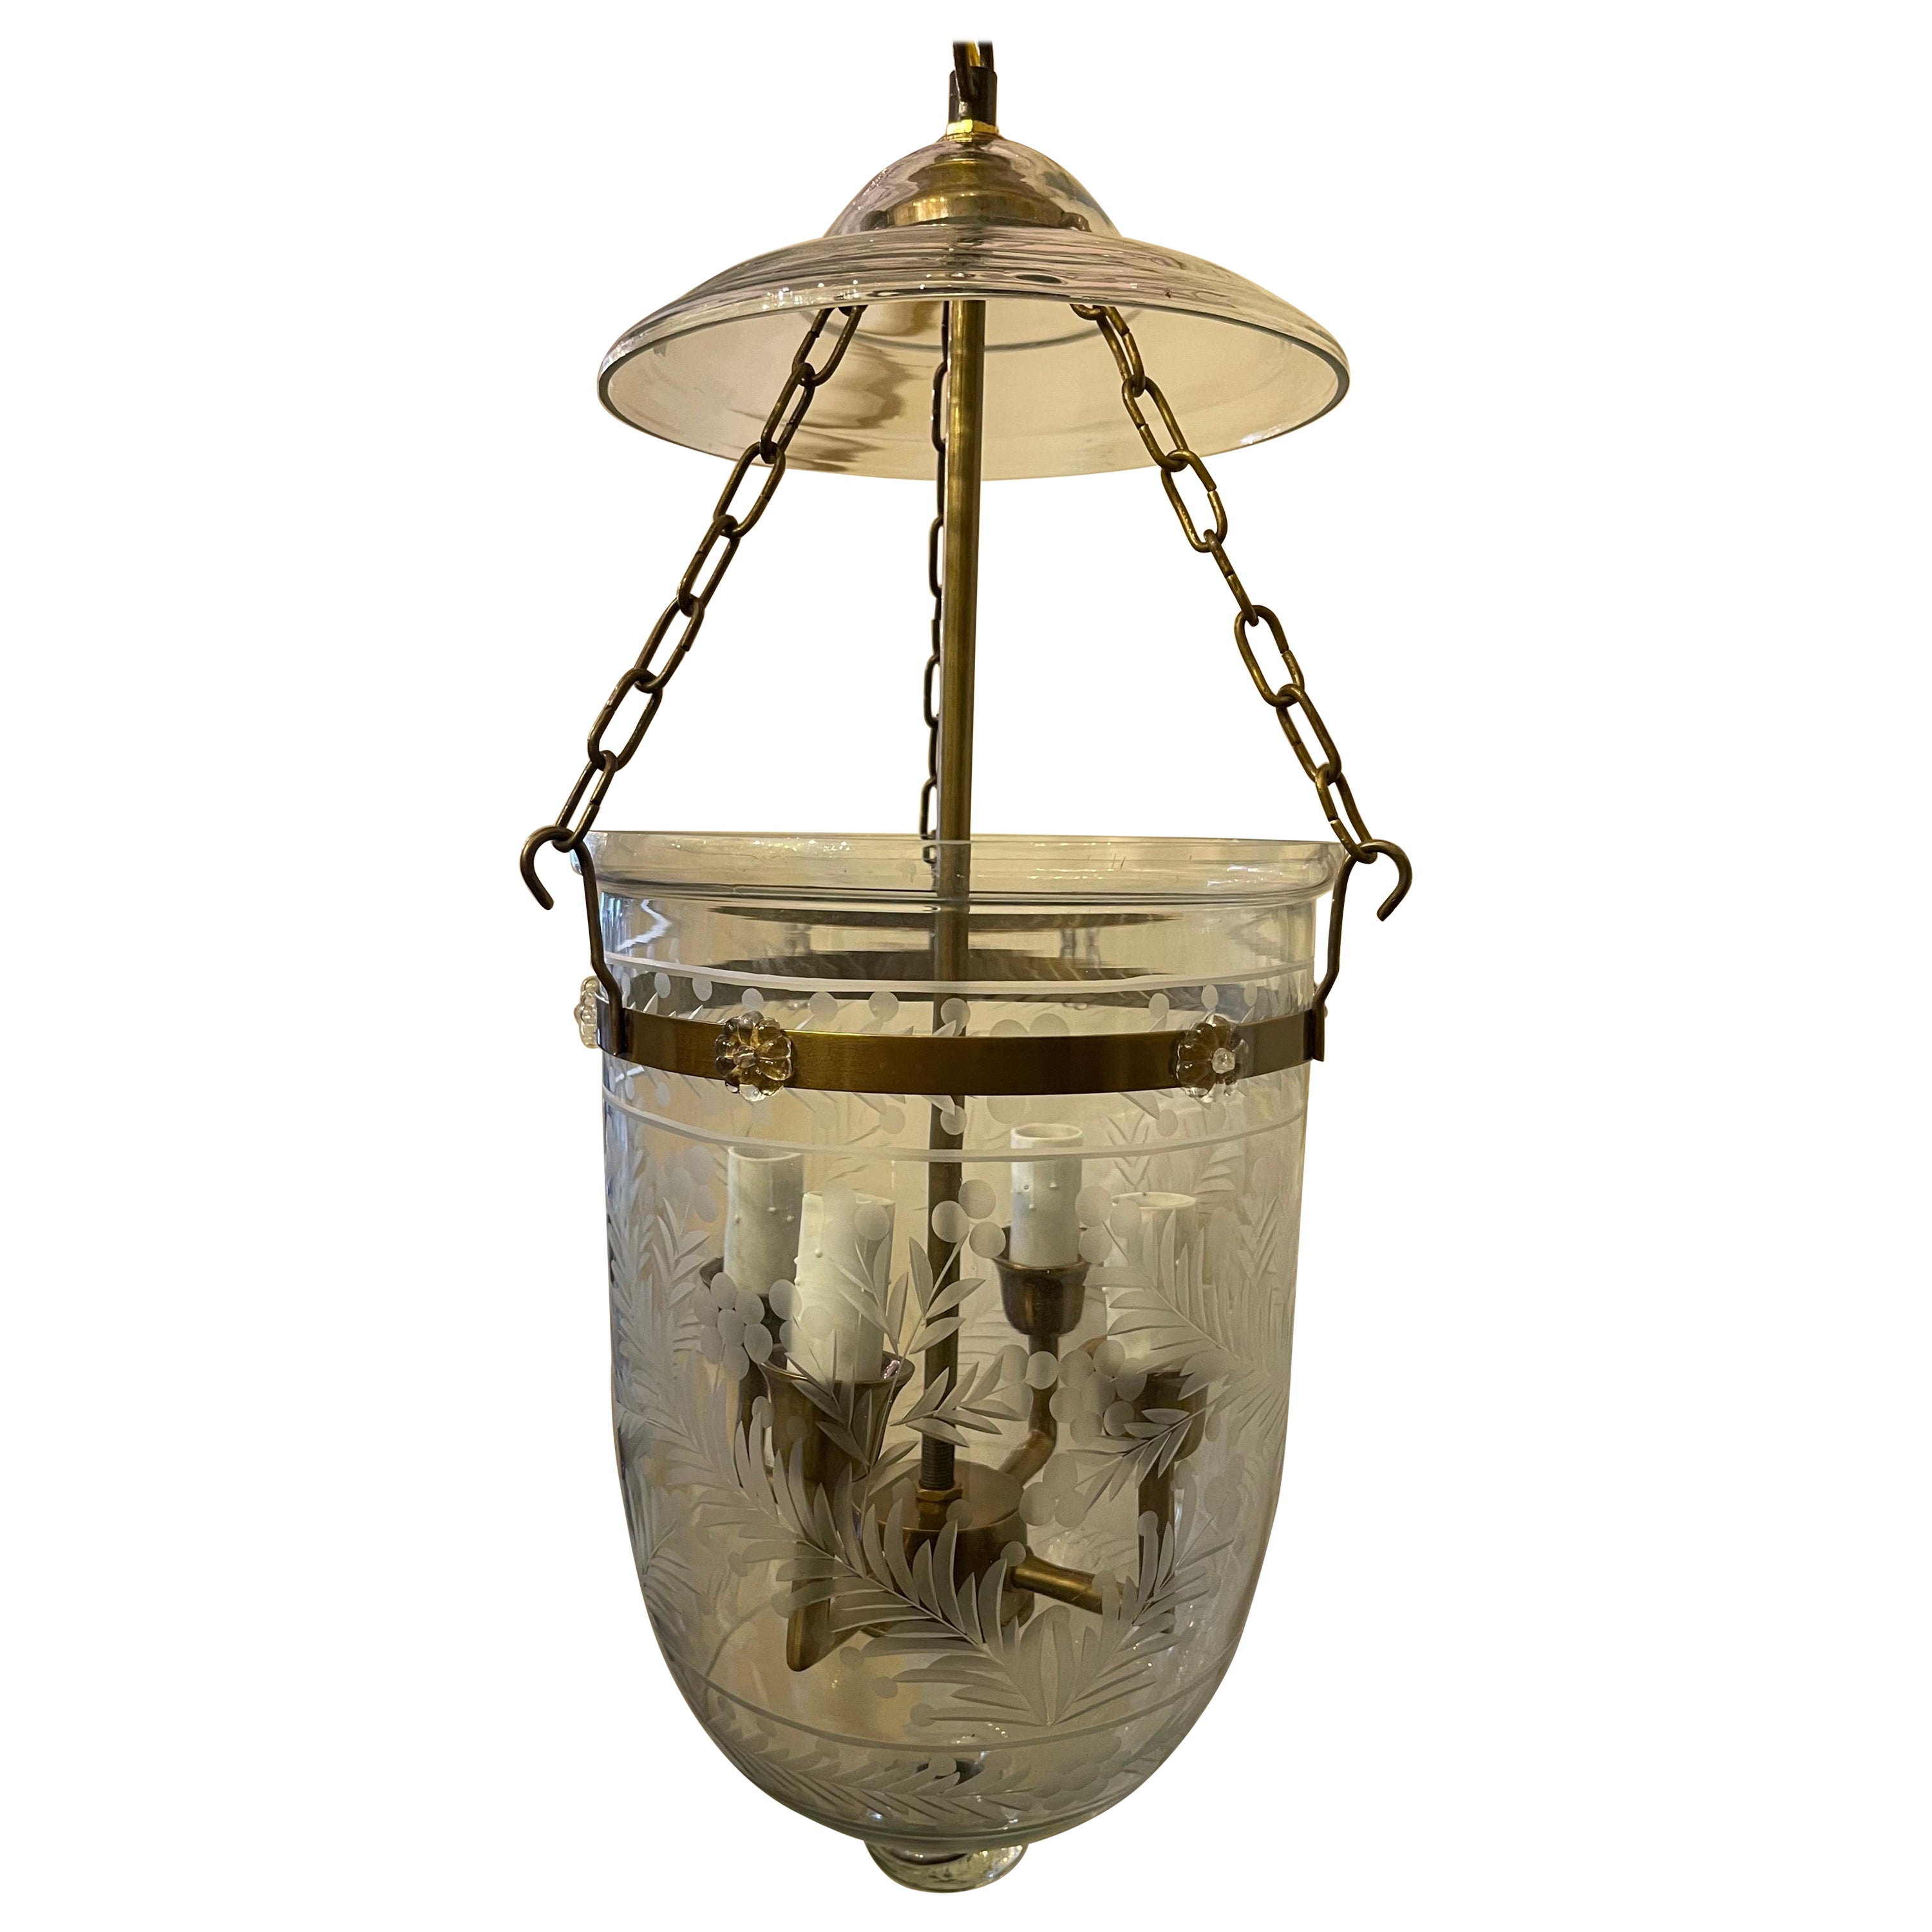 Etched Glass Leaves Flowers Bell Jar Lantern Brass Light Fixtures 4 Available For Sale